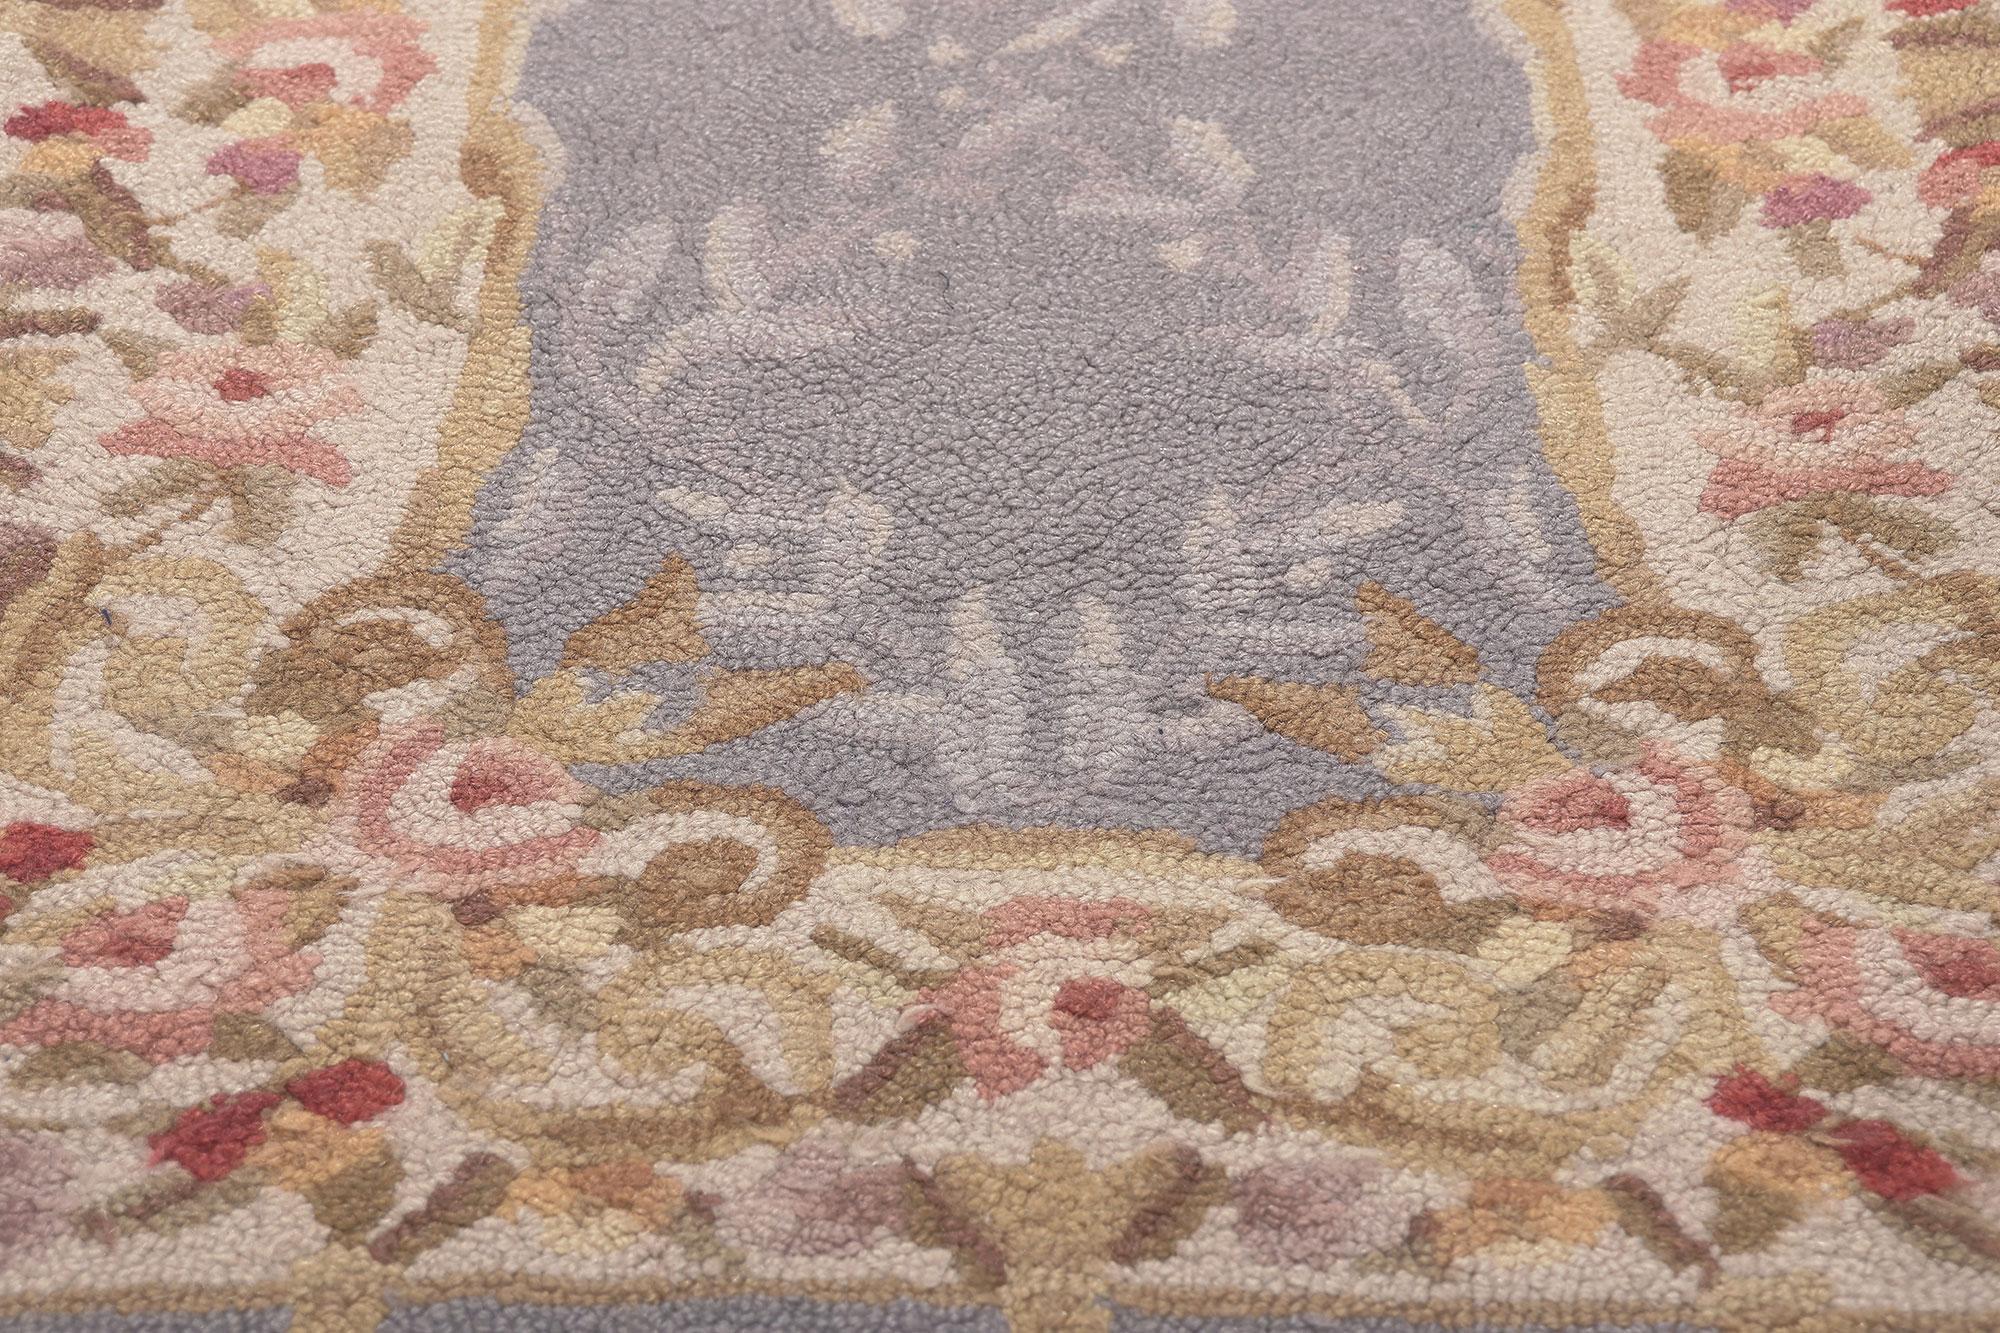 Vintage Aubusson American Hooked Rug, Feminine Charm Meets Cozy Chic In Good Condition For Sale In Dallas, TX